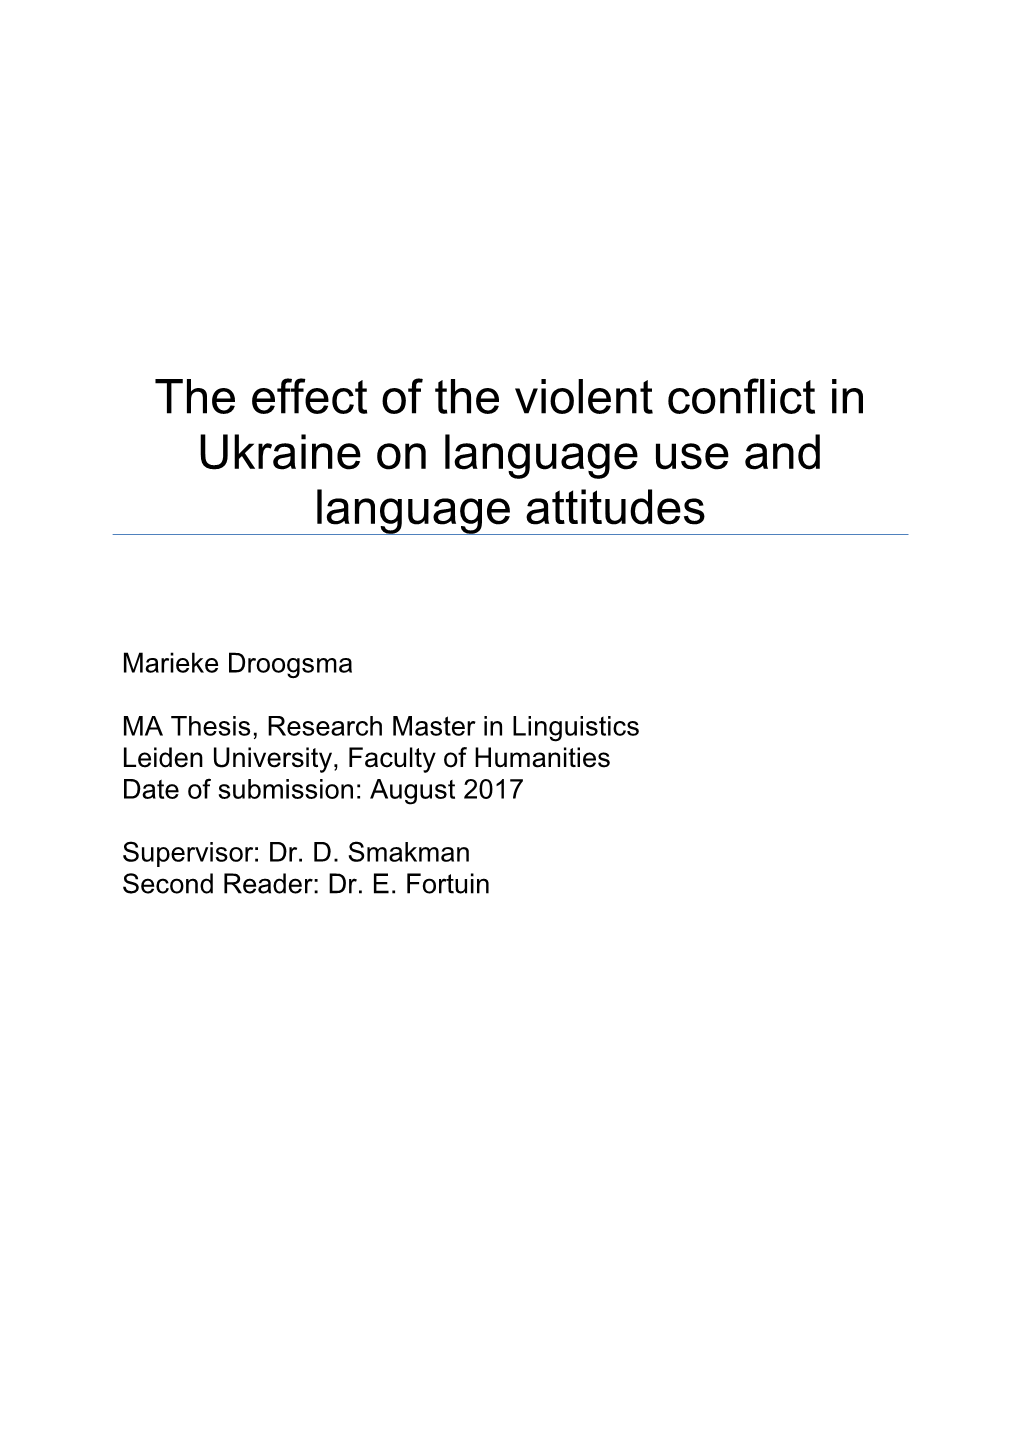 The Effect of the Violent Conflict in Ukraine on Language Use and Language Attitudes